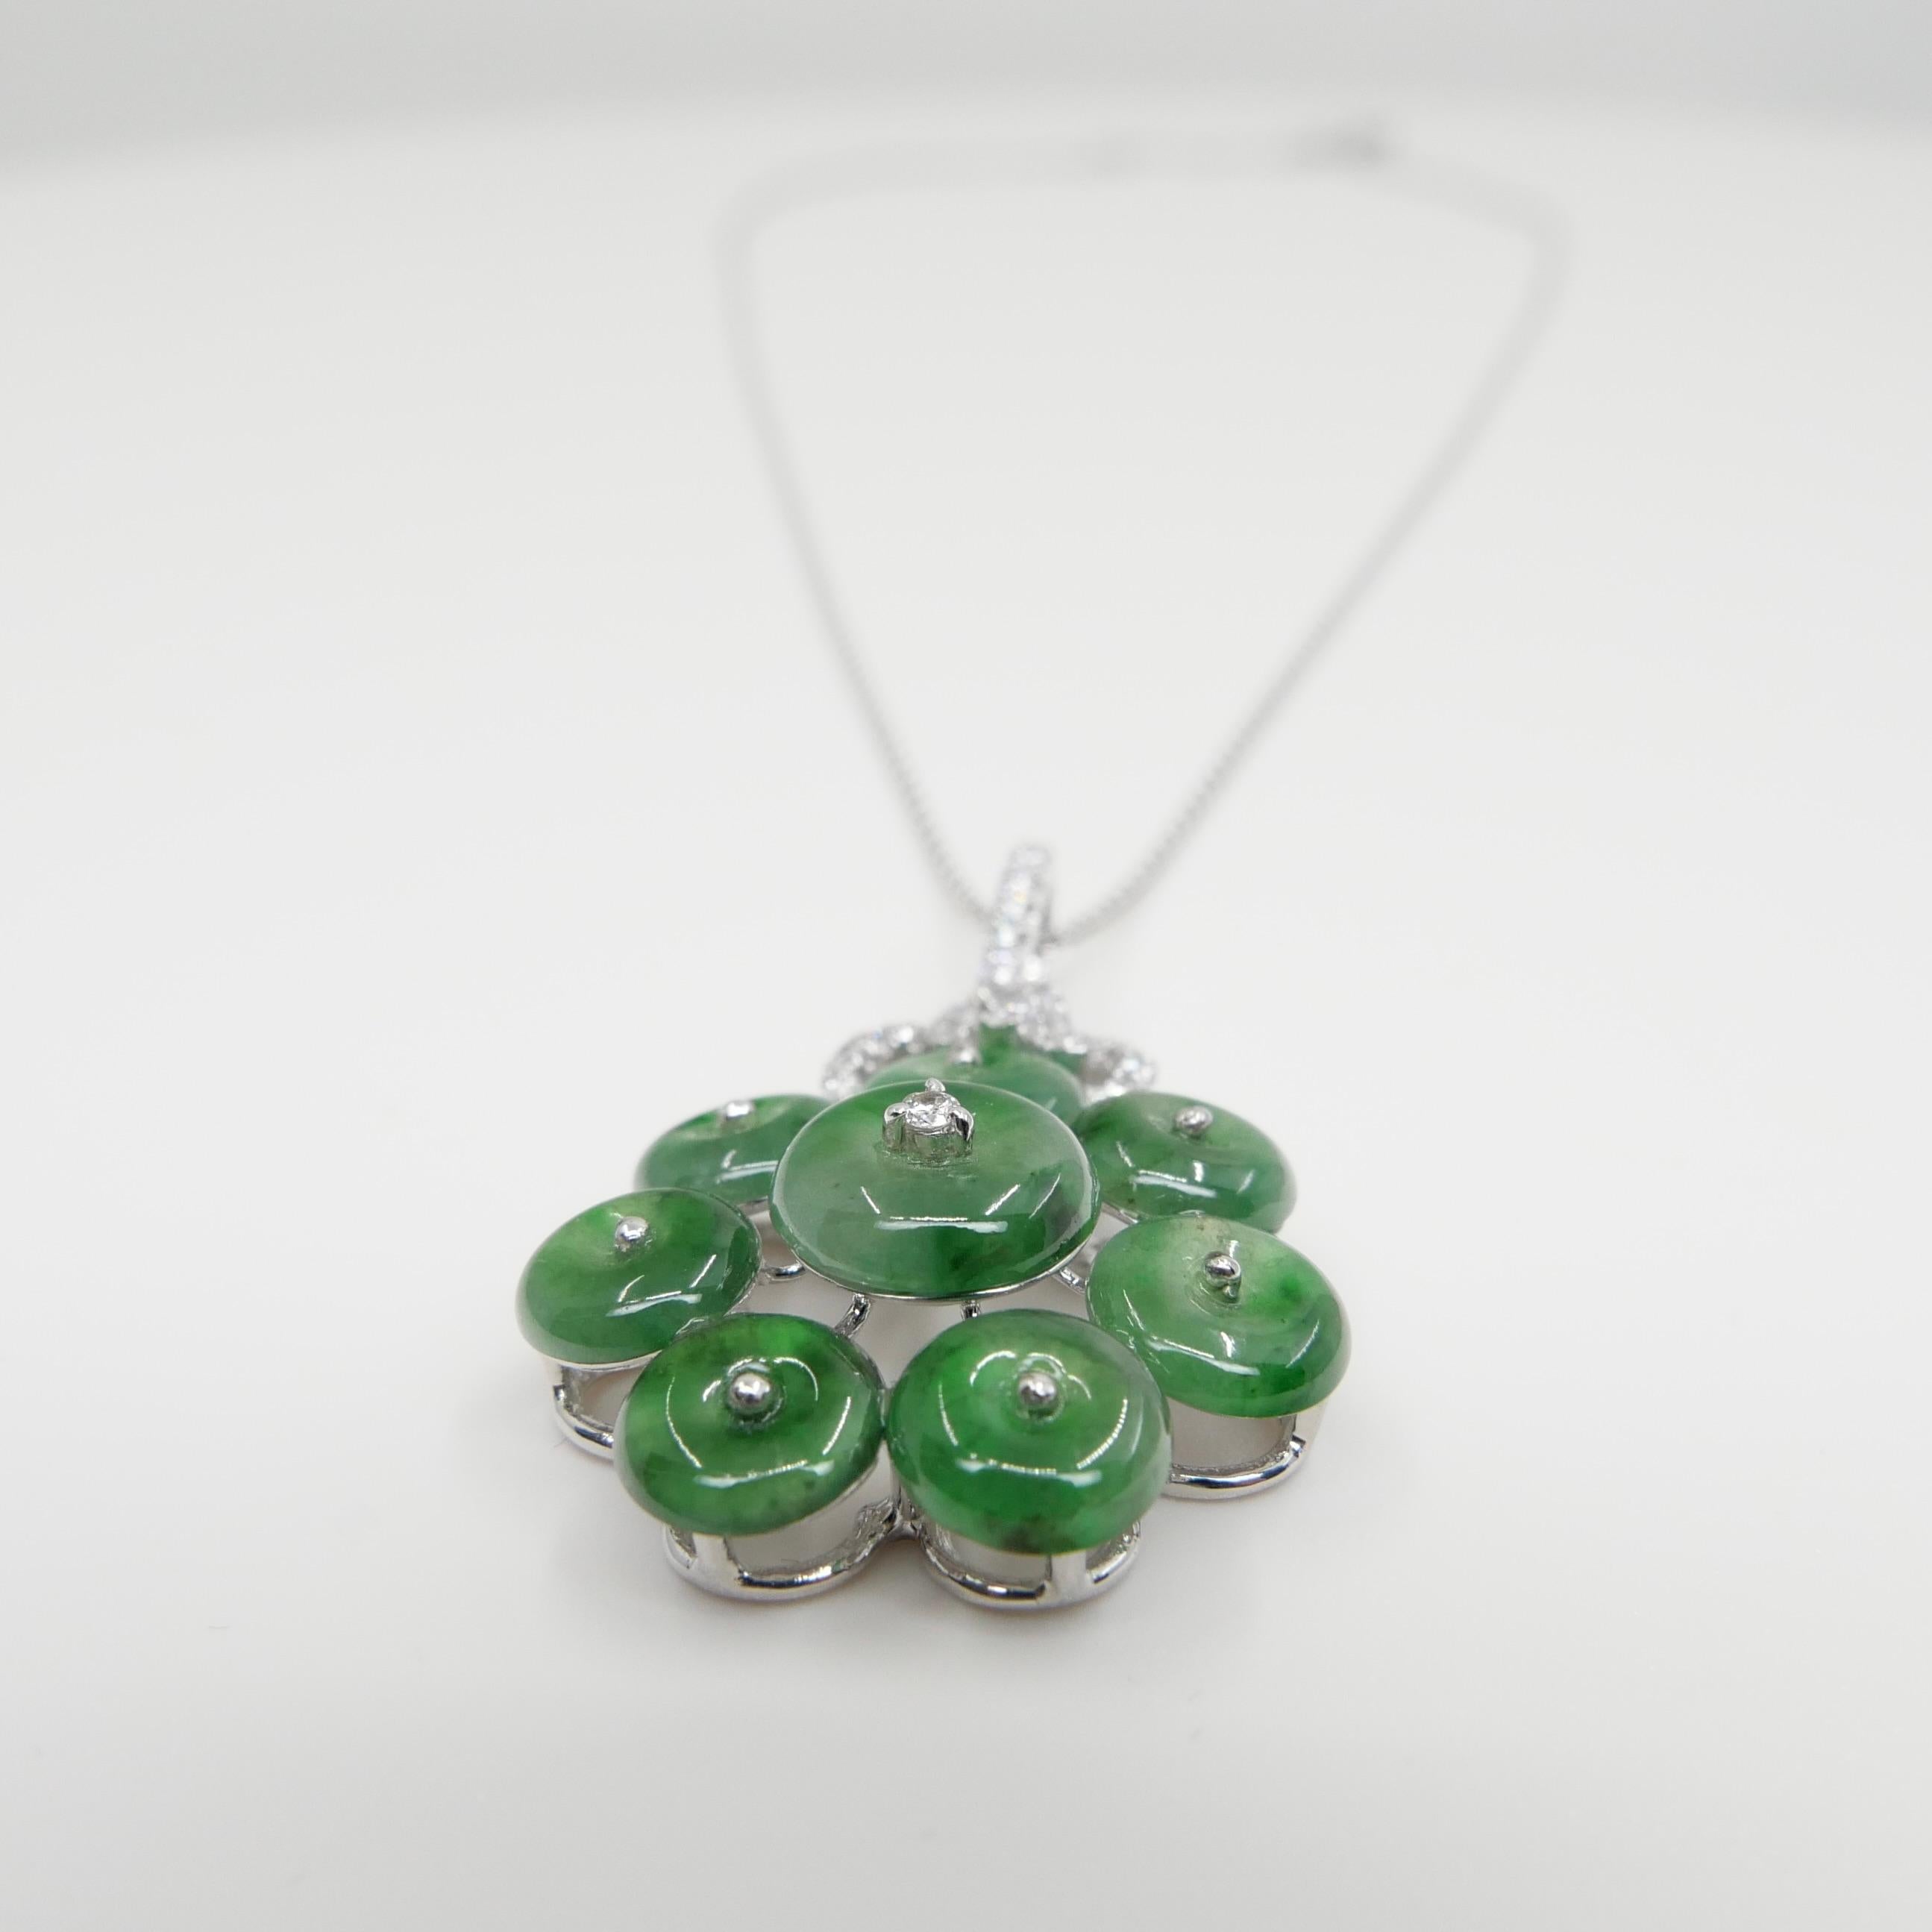 Certified Type A Cluster Icy Jade Discs & Diamond Pendant, High Translucency For Sale 4